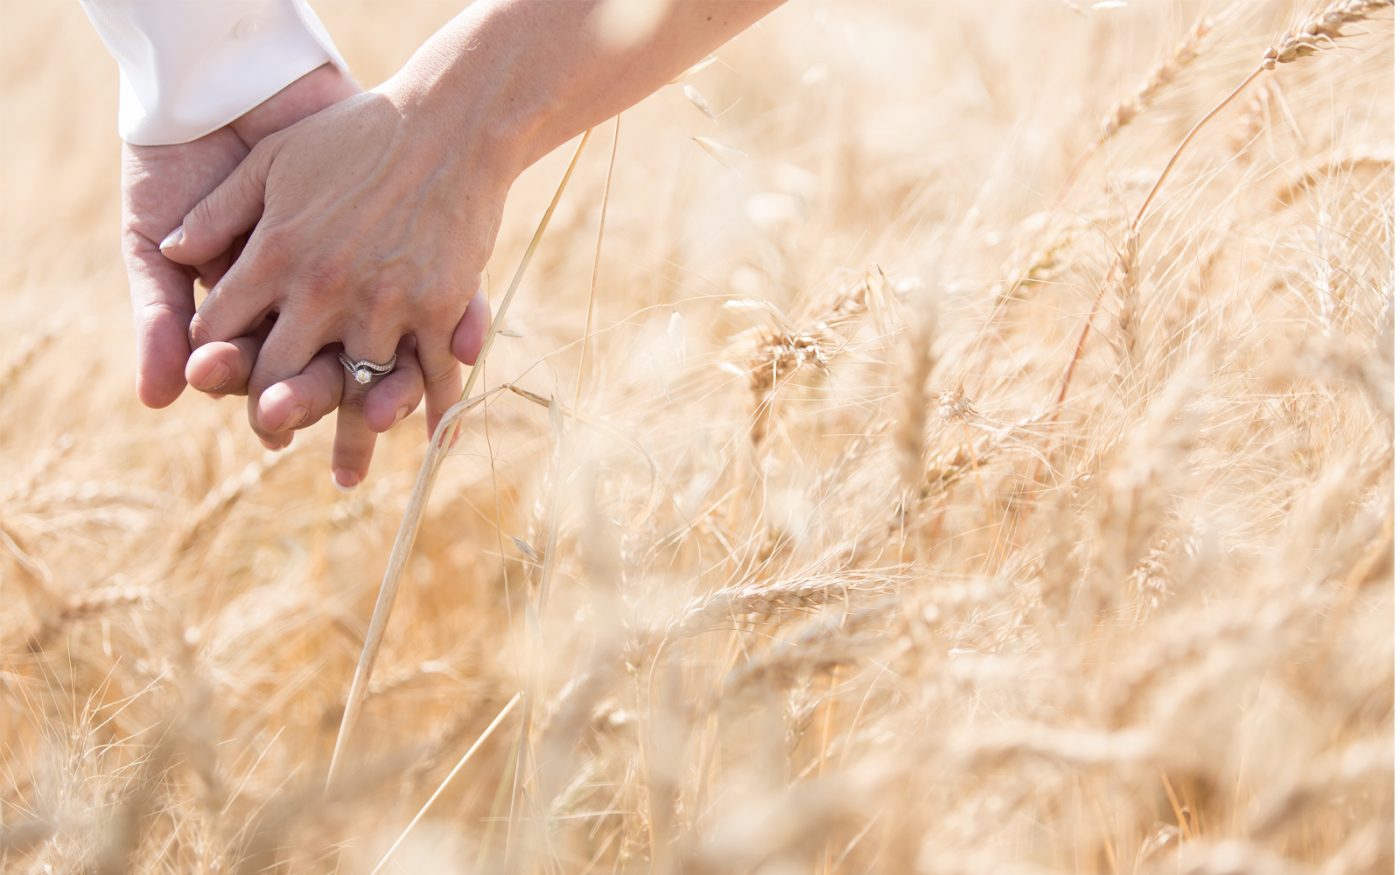 CarlaMike holding hands in a wheat field